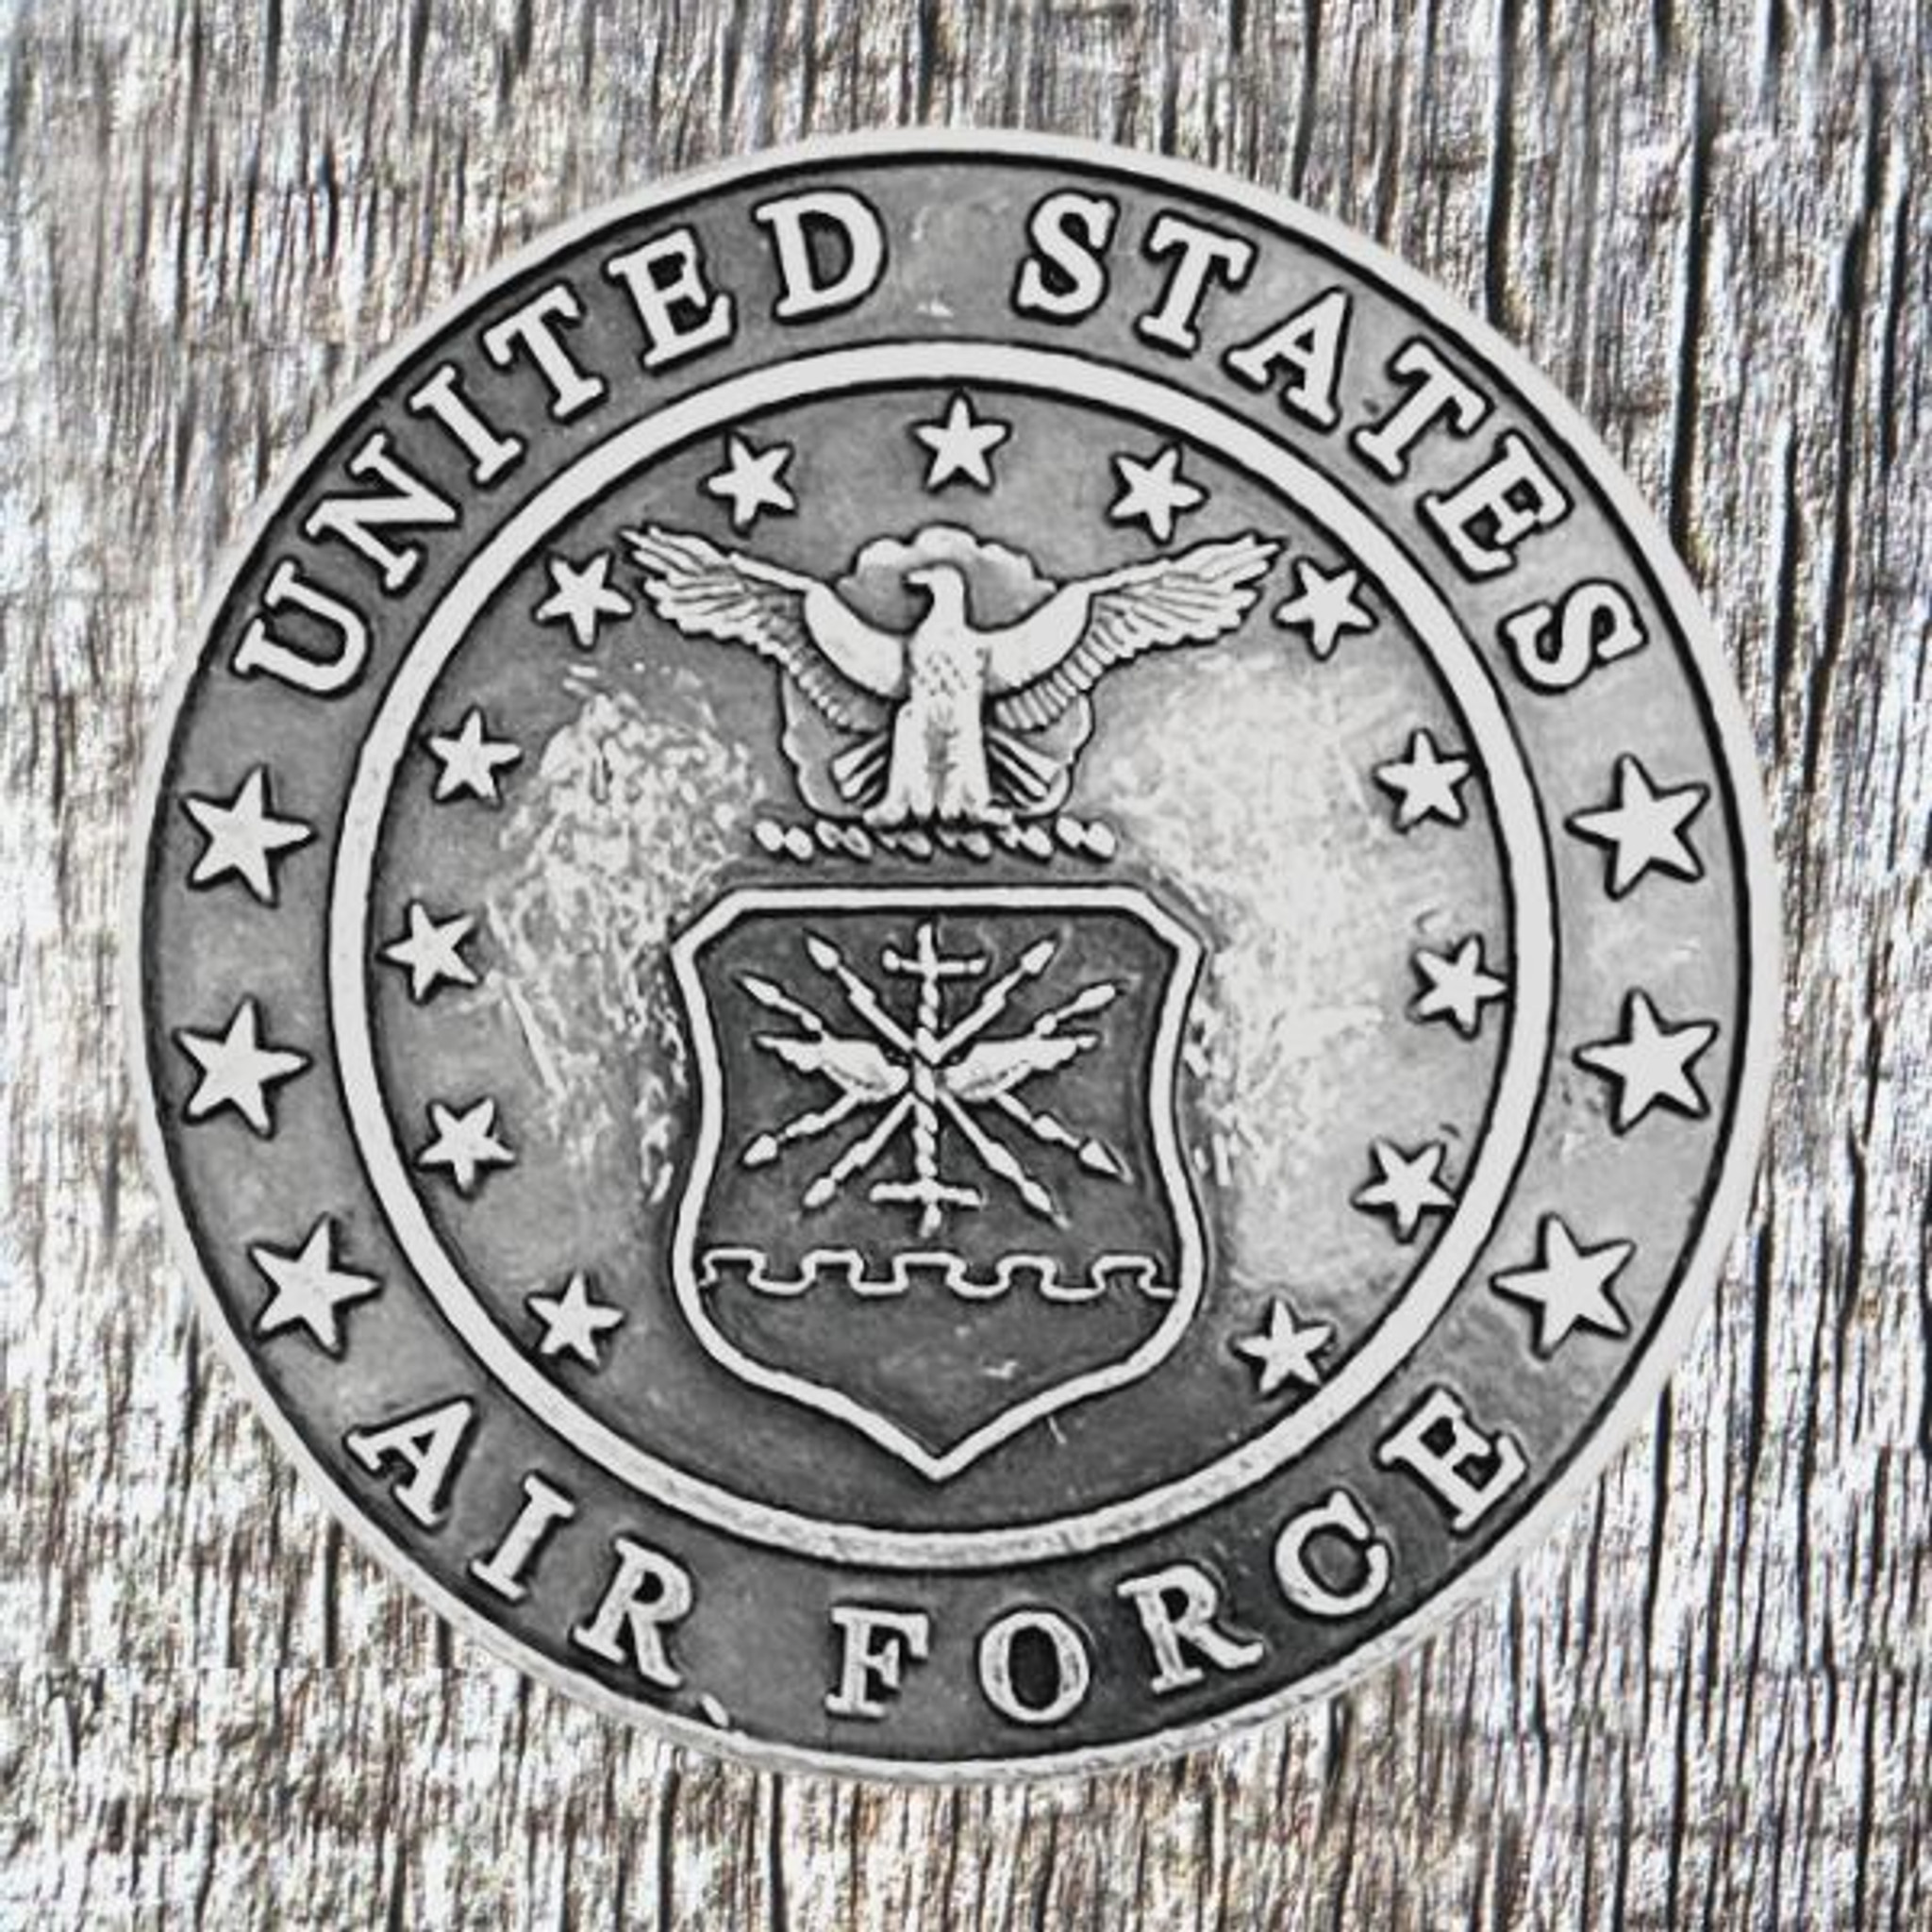 MILITARY 1-3/8 Inch CONCHO UNITED STATES AIR FORCE - Texas Uniques Store